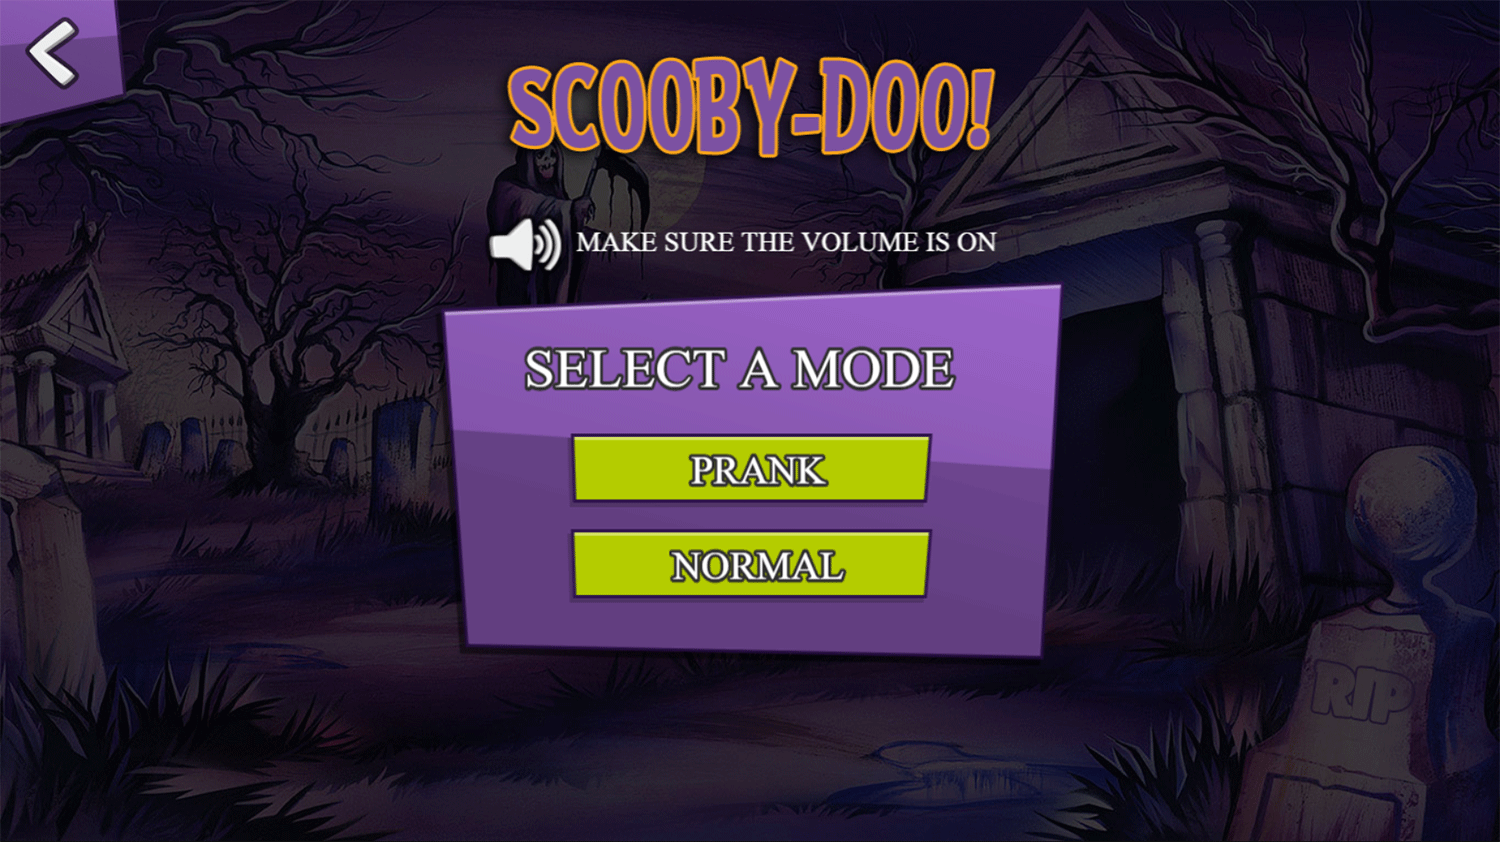 Scooby Doo Search N Scare Mode Select Screenshot.